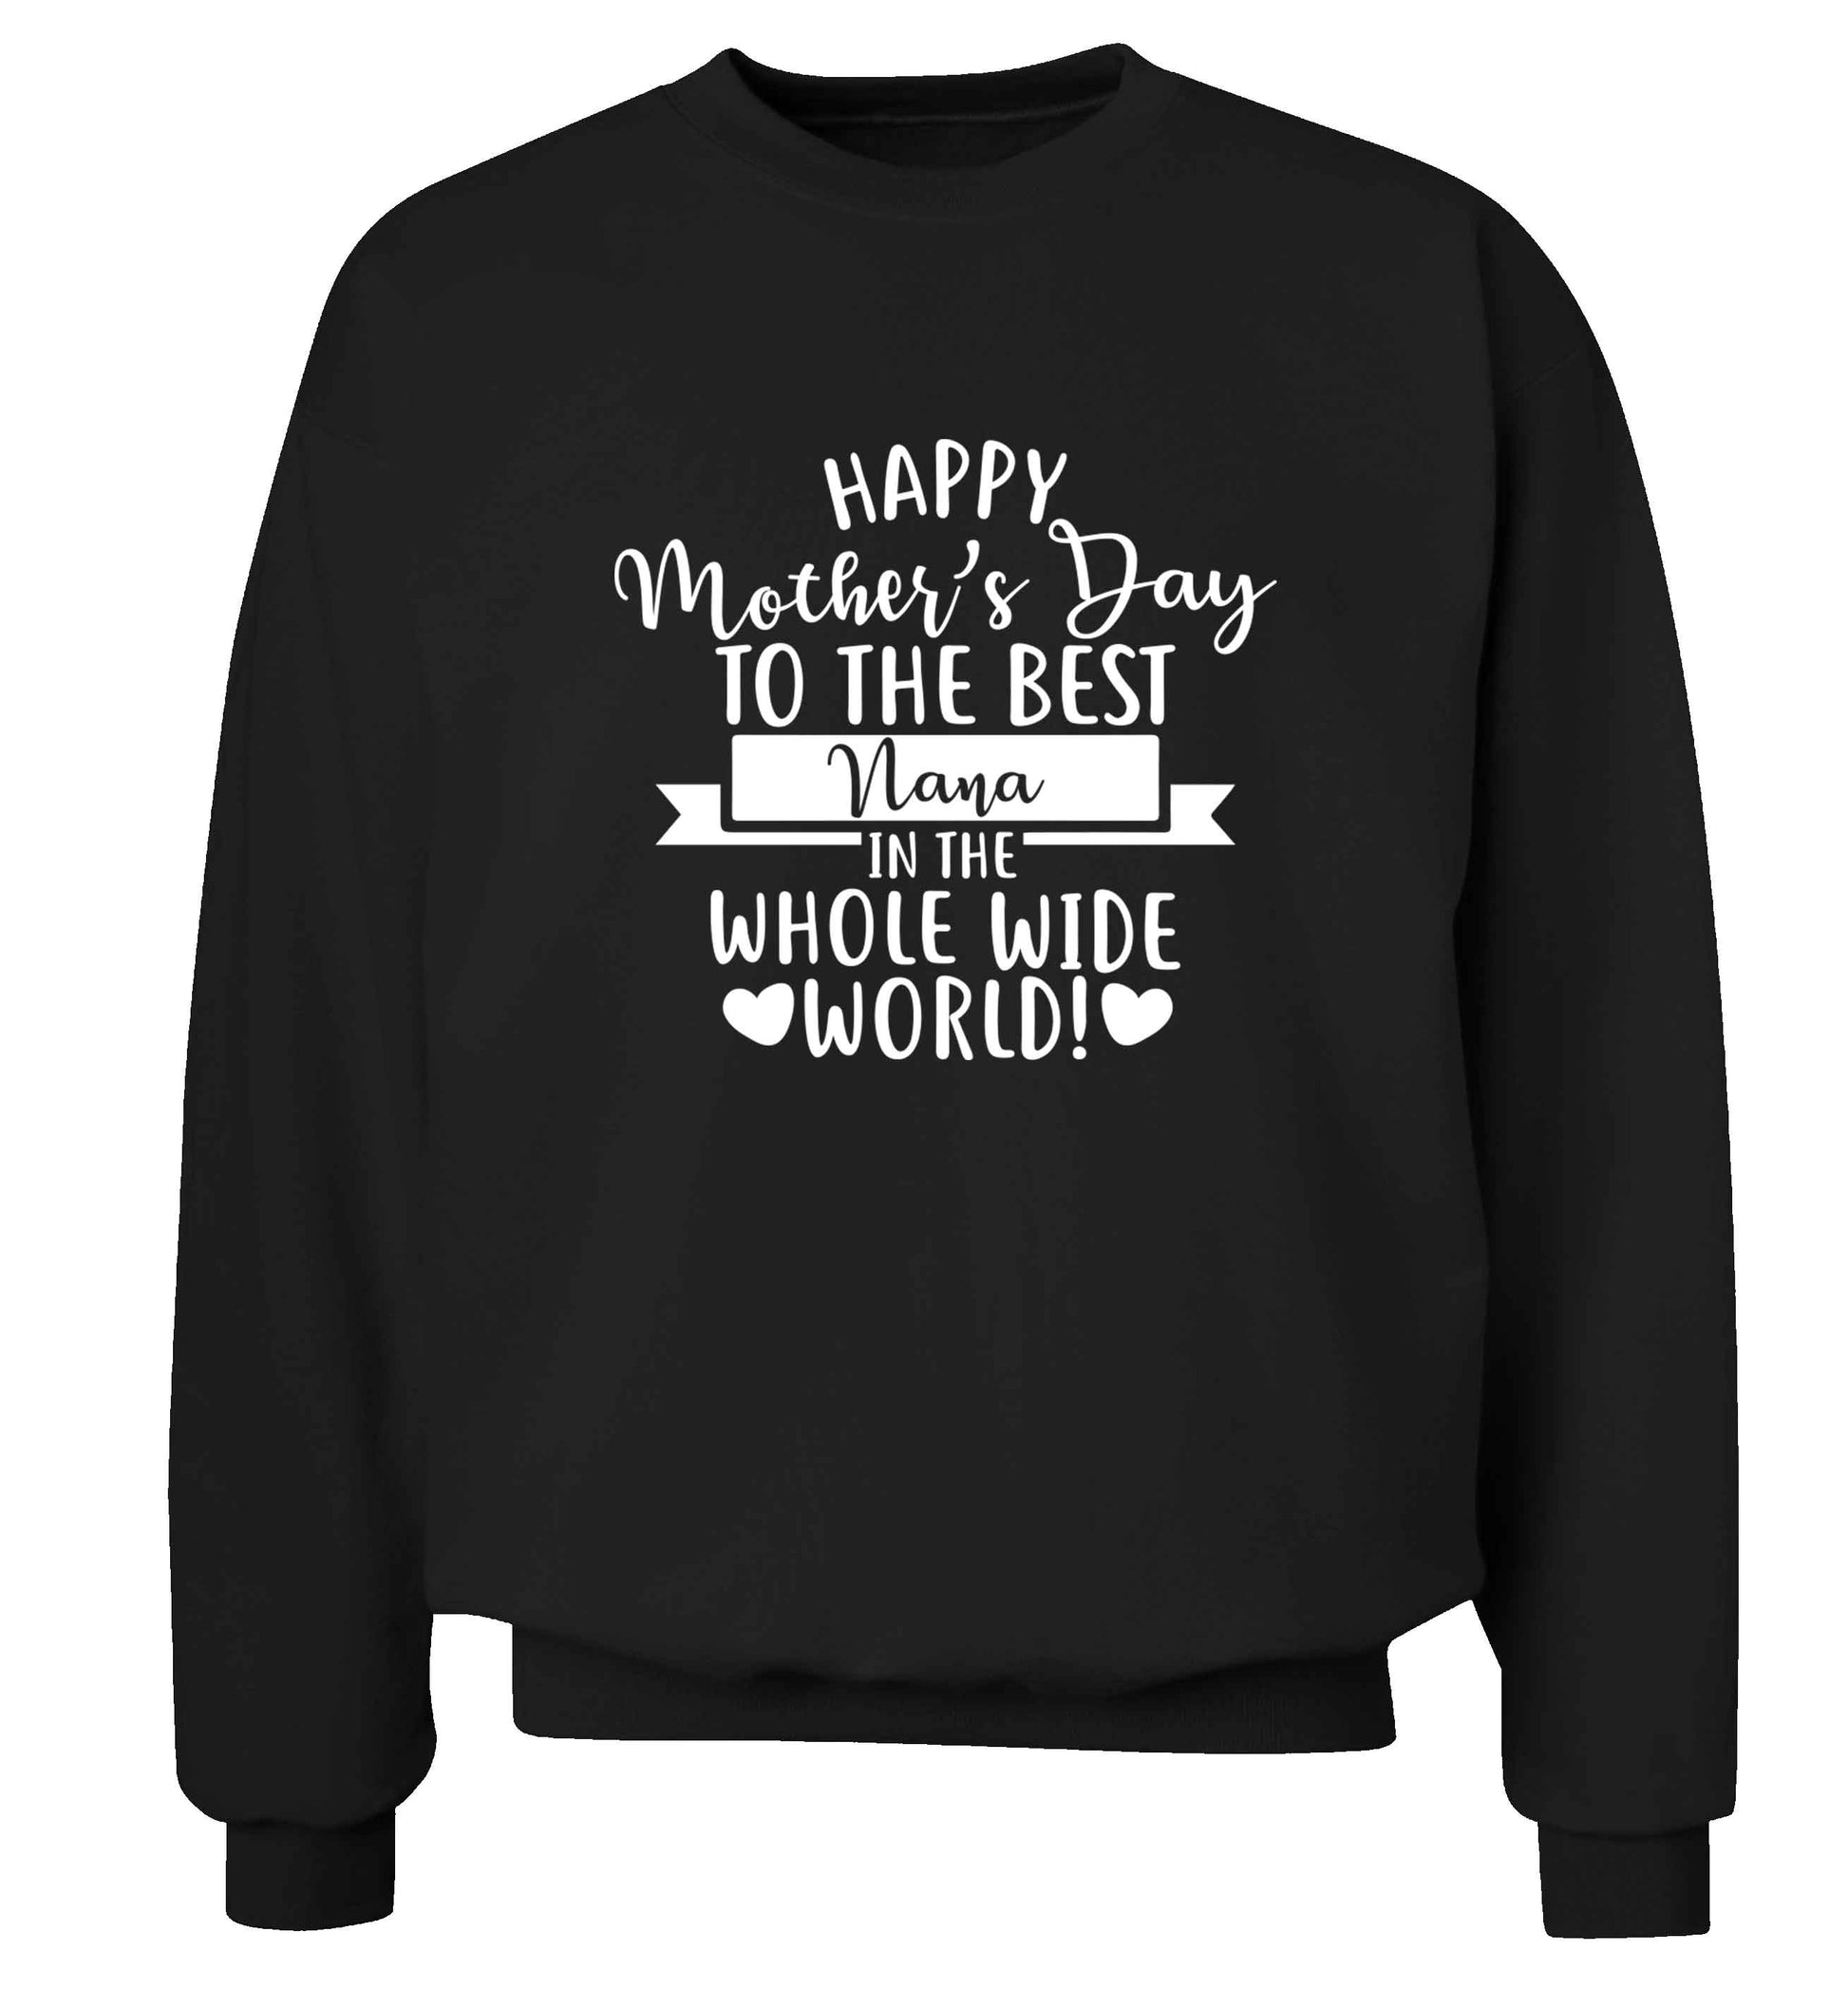 Happy mother's day to the best nana in the world adult's unisex black sweater 2XL